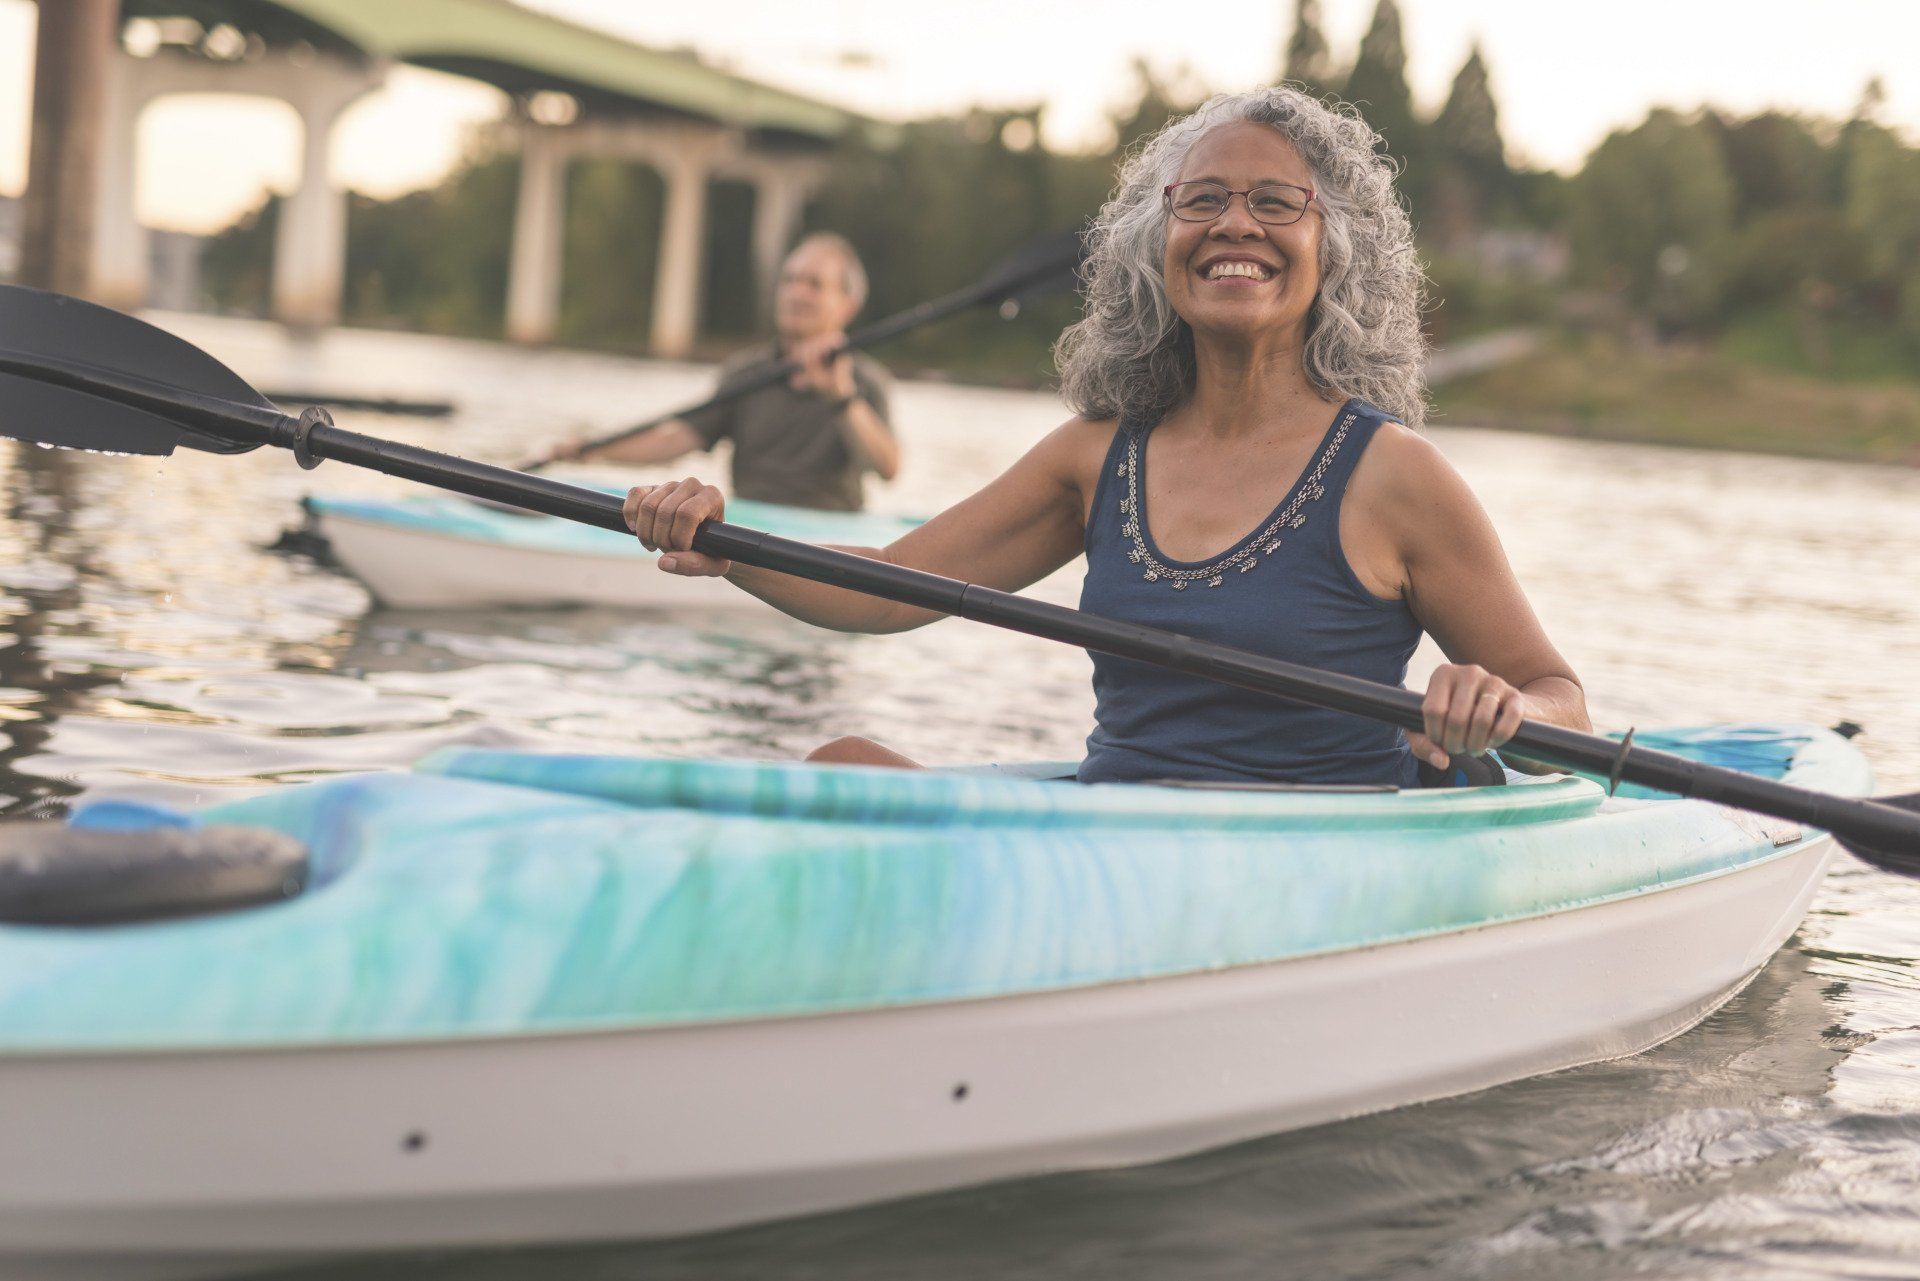 Review Your Insurance | Safeguard Your Retirement Goals | NZFP